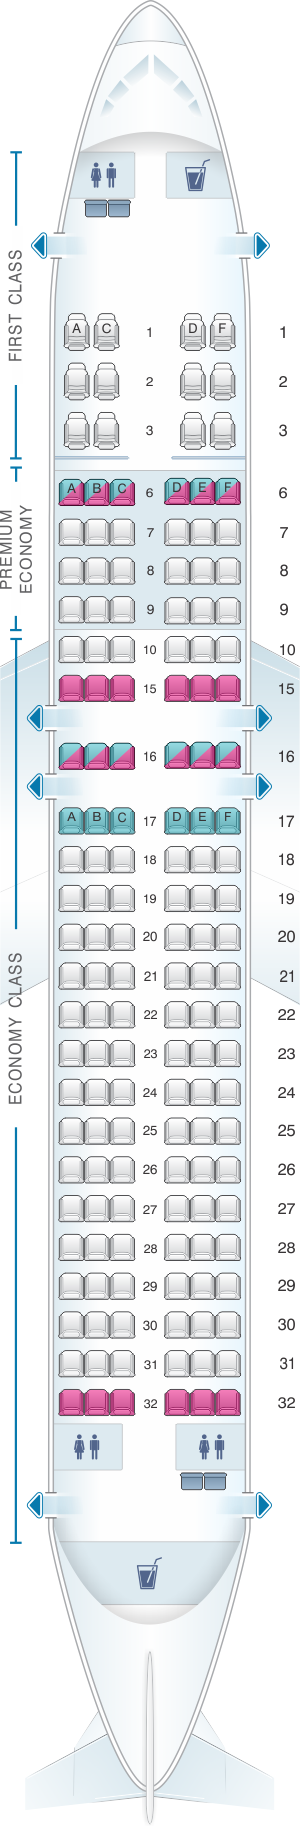 Airbus A320 Sharklets Seating Map - Image to u